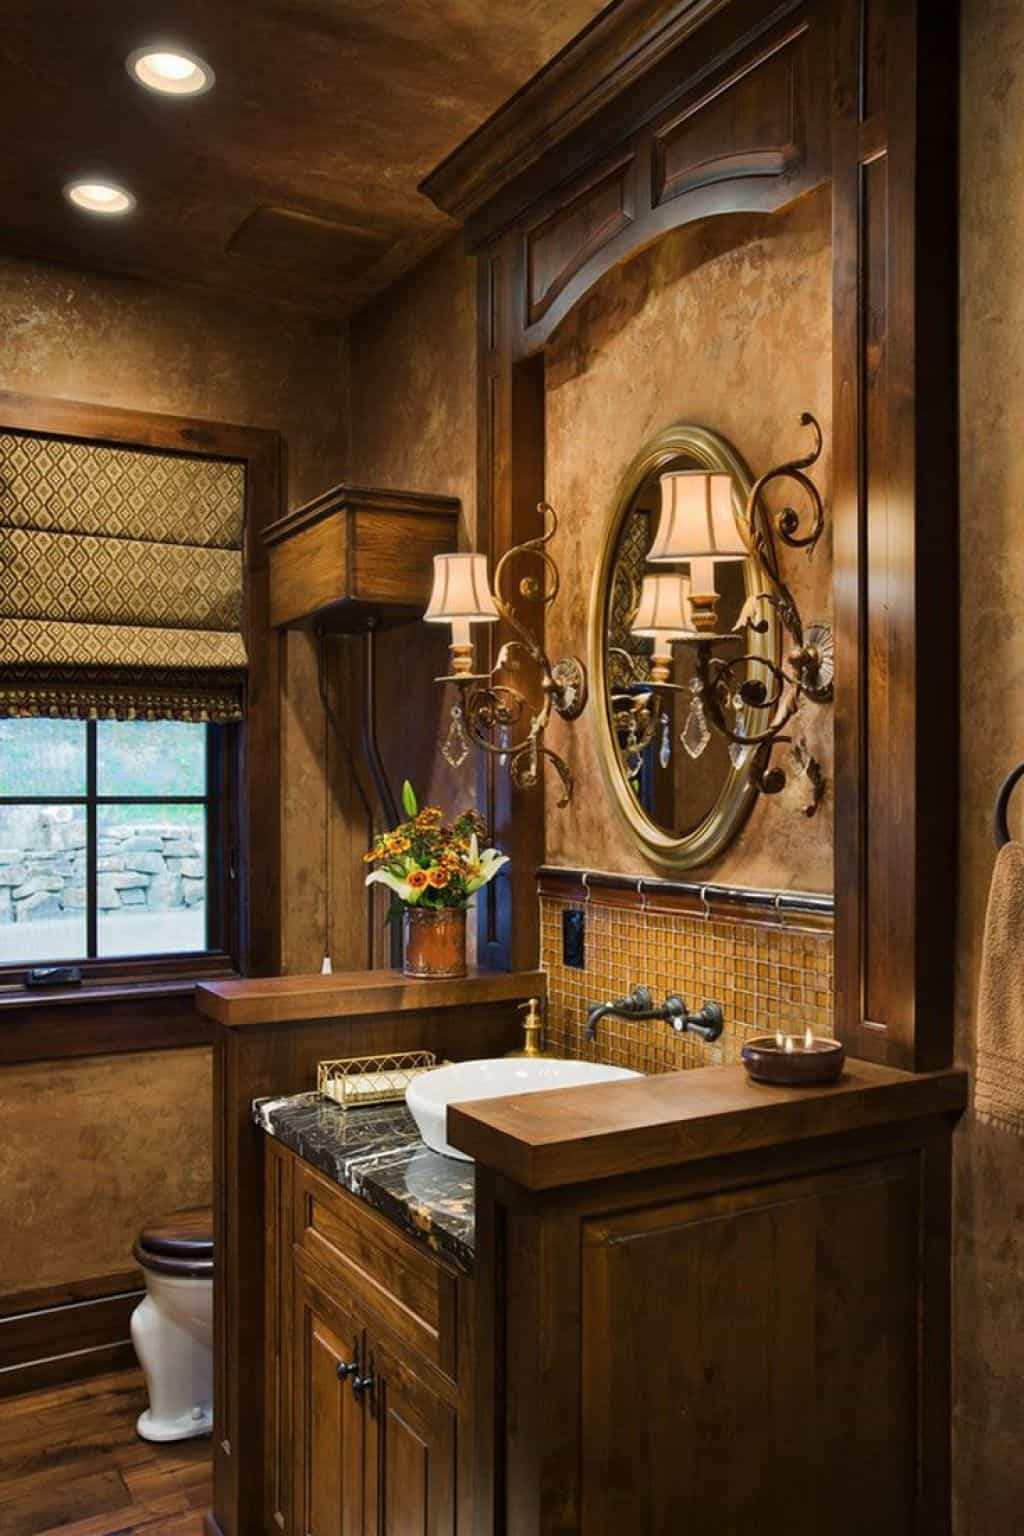 Tuscan Bathroom Vanity
 Tuscan Bathroom With Wall Sconces And Wooden Vanity